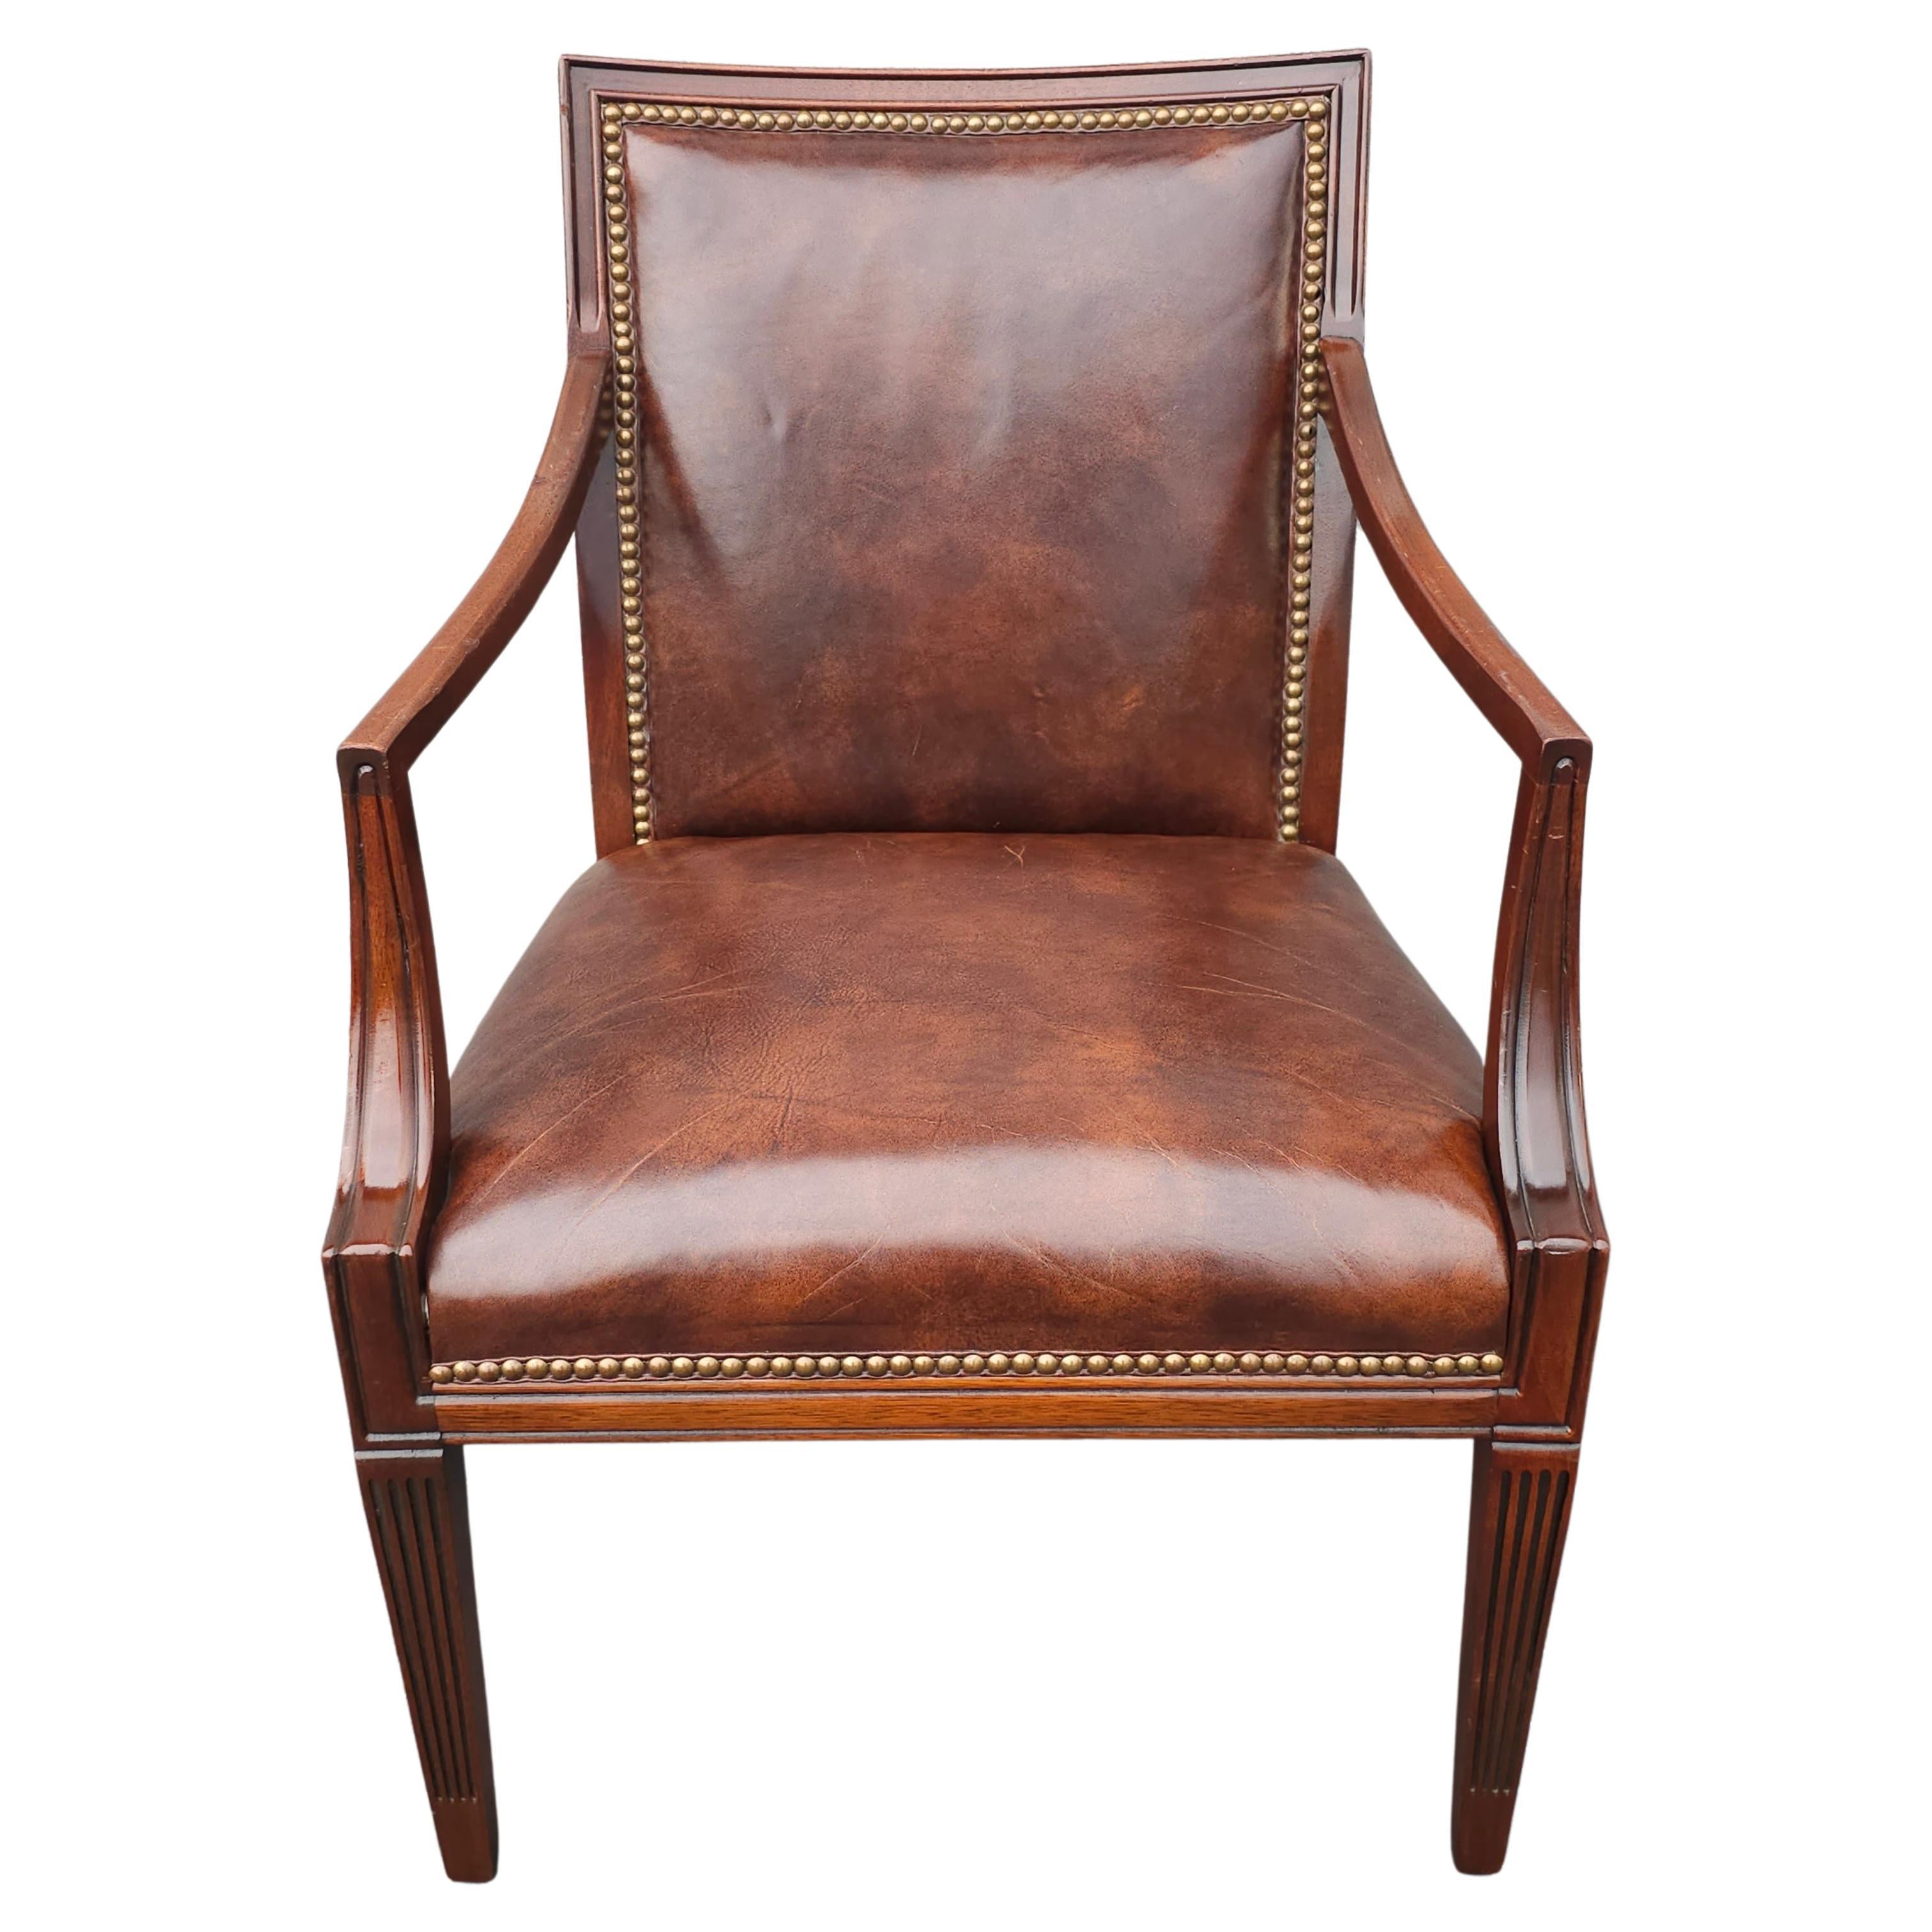 20th Century Stateville Chair Co. Mahogany and Leather Upholstered Armchair 